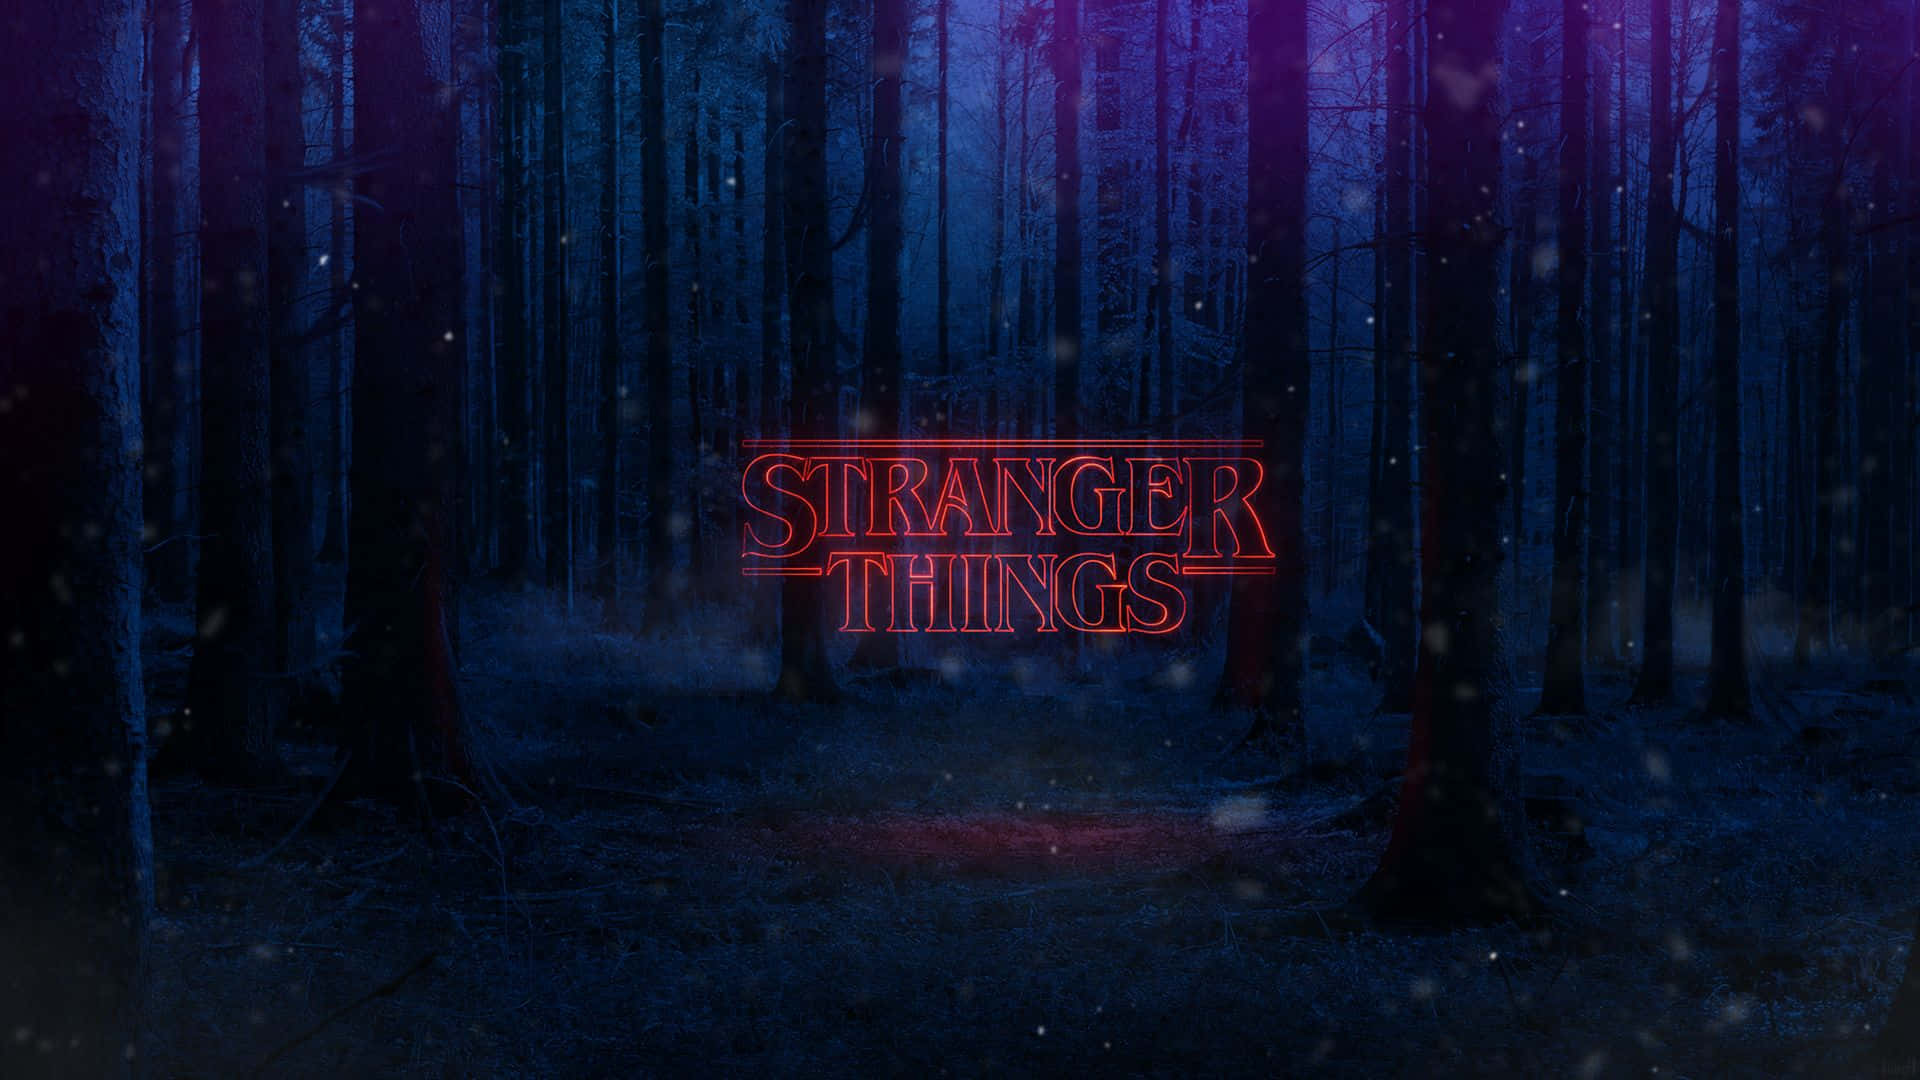 Get the quirky aesthetic of Stranger Things on your desktop Wallpaper